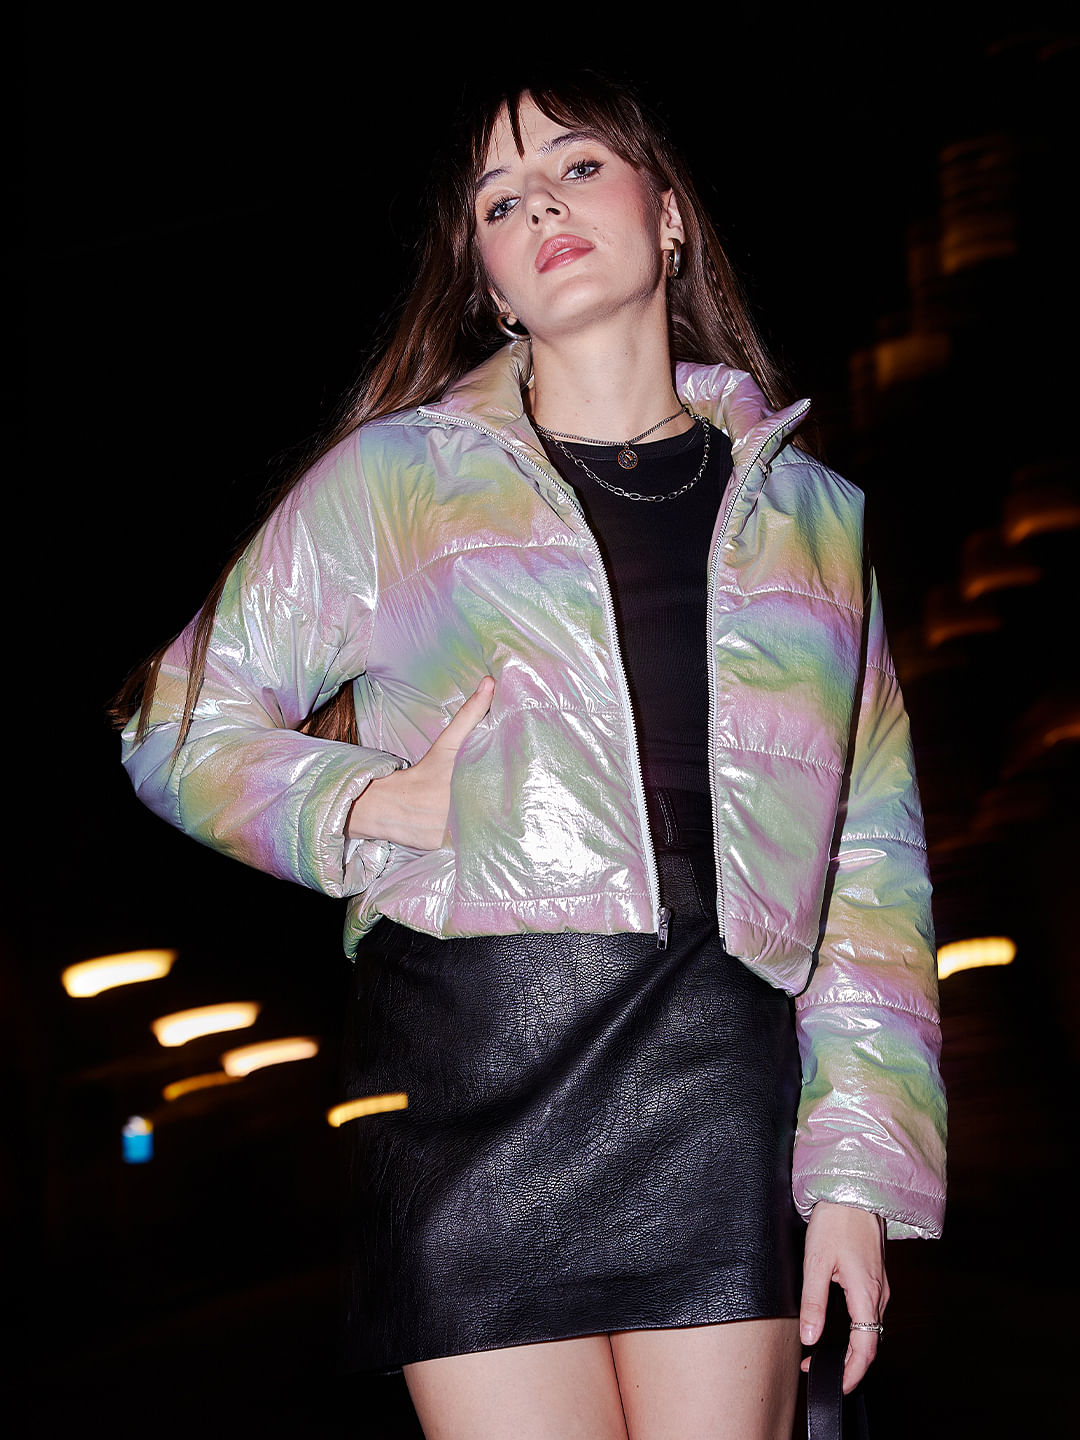 Buy Official Solids: Shiny Metal Women Jackets Online